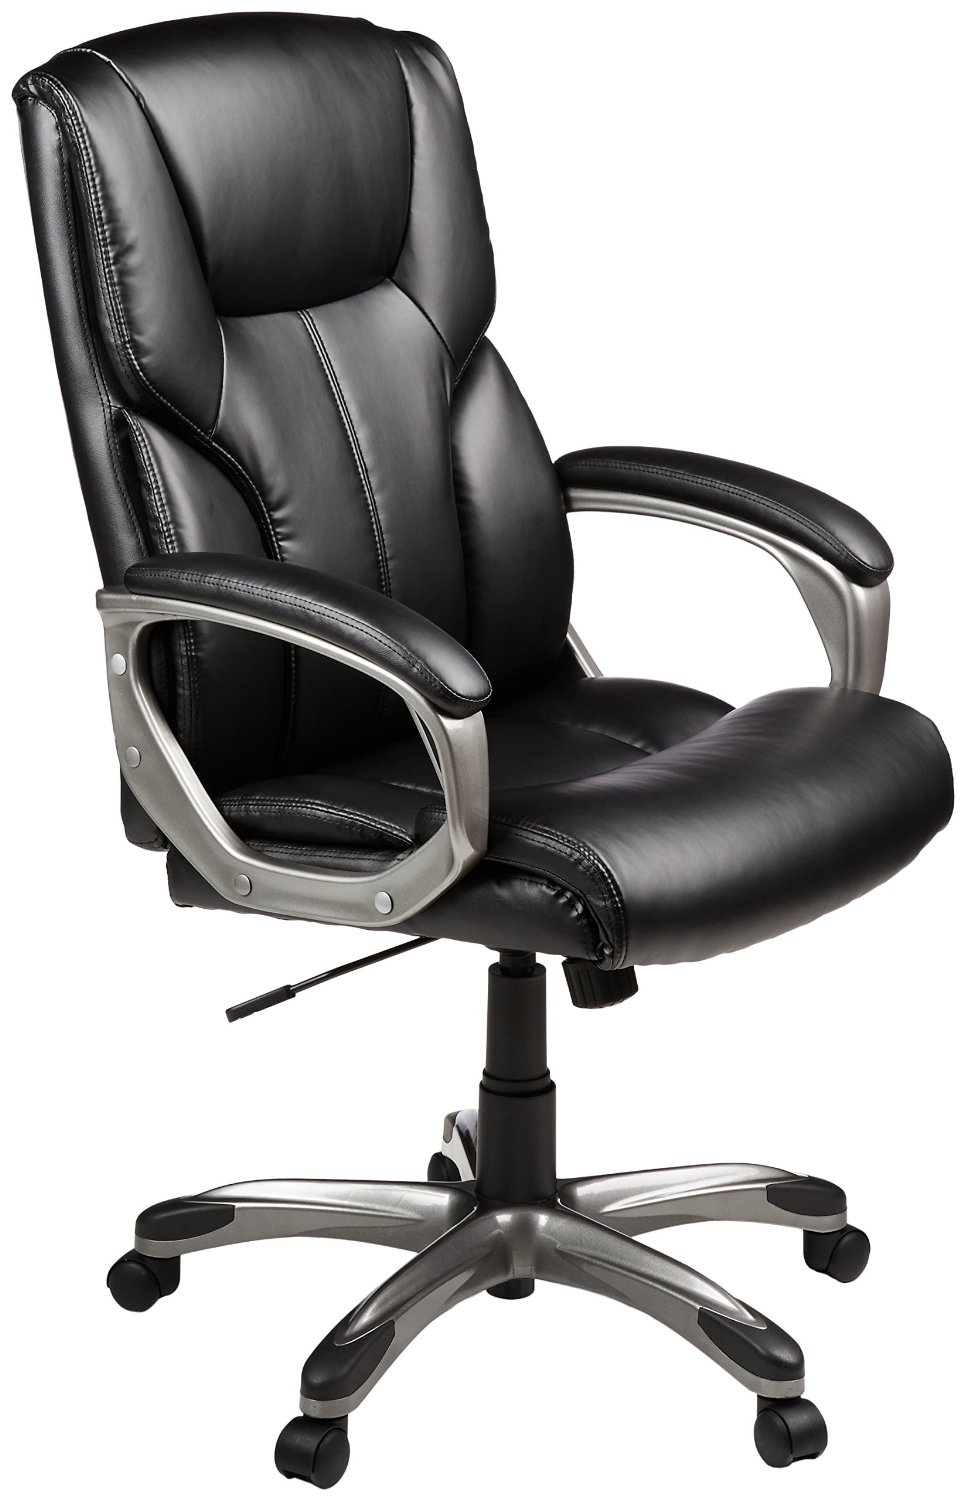 Top 10 Best Office Chairs 2017 Top Value Reviews